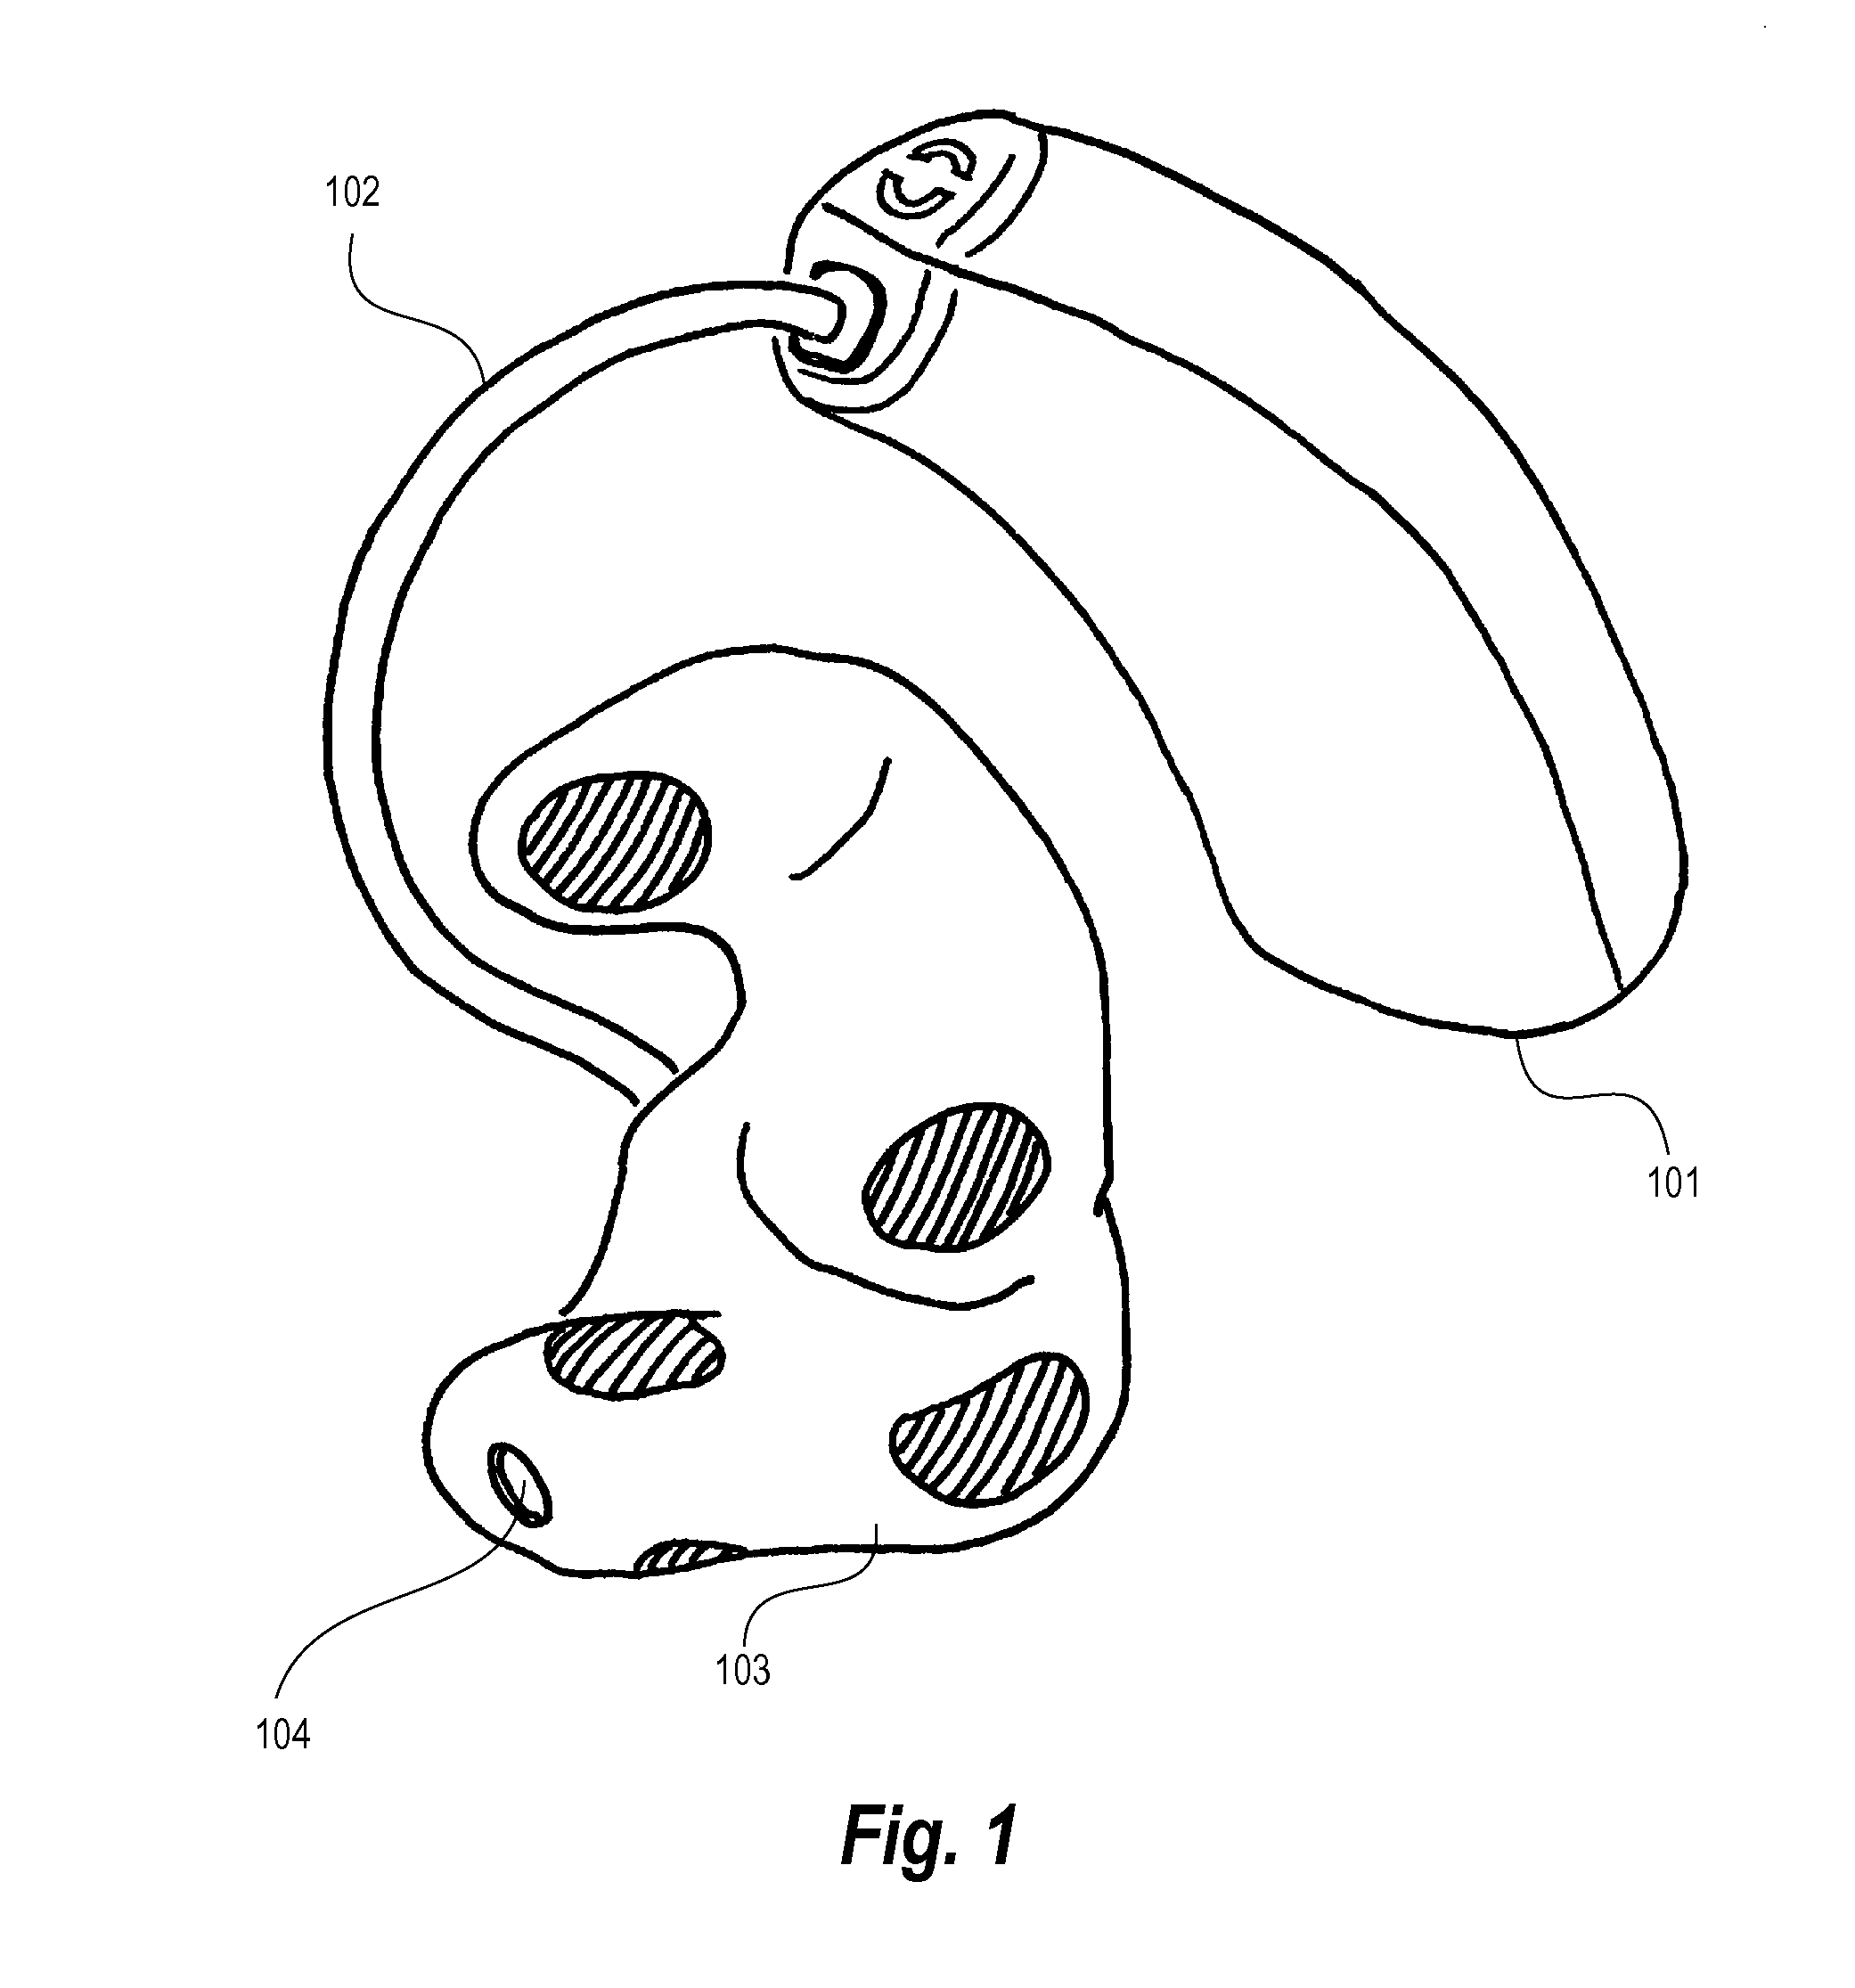 Hearing aid adapted for detecting brain waves and a method for adapting such a hearing aid